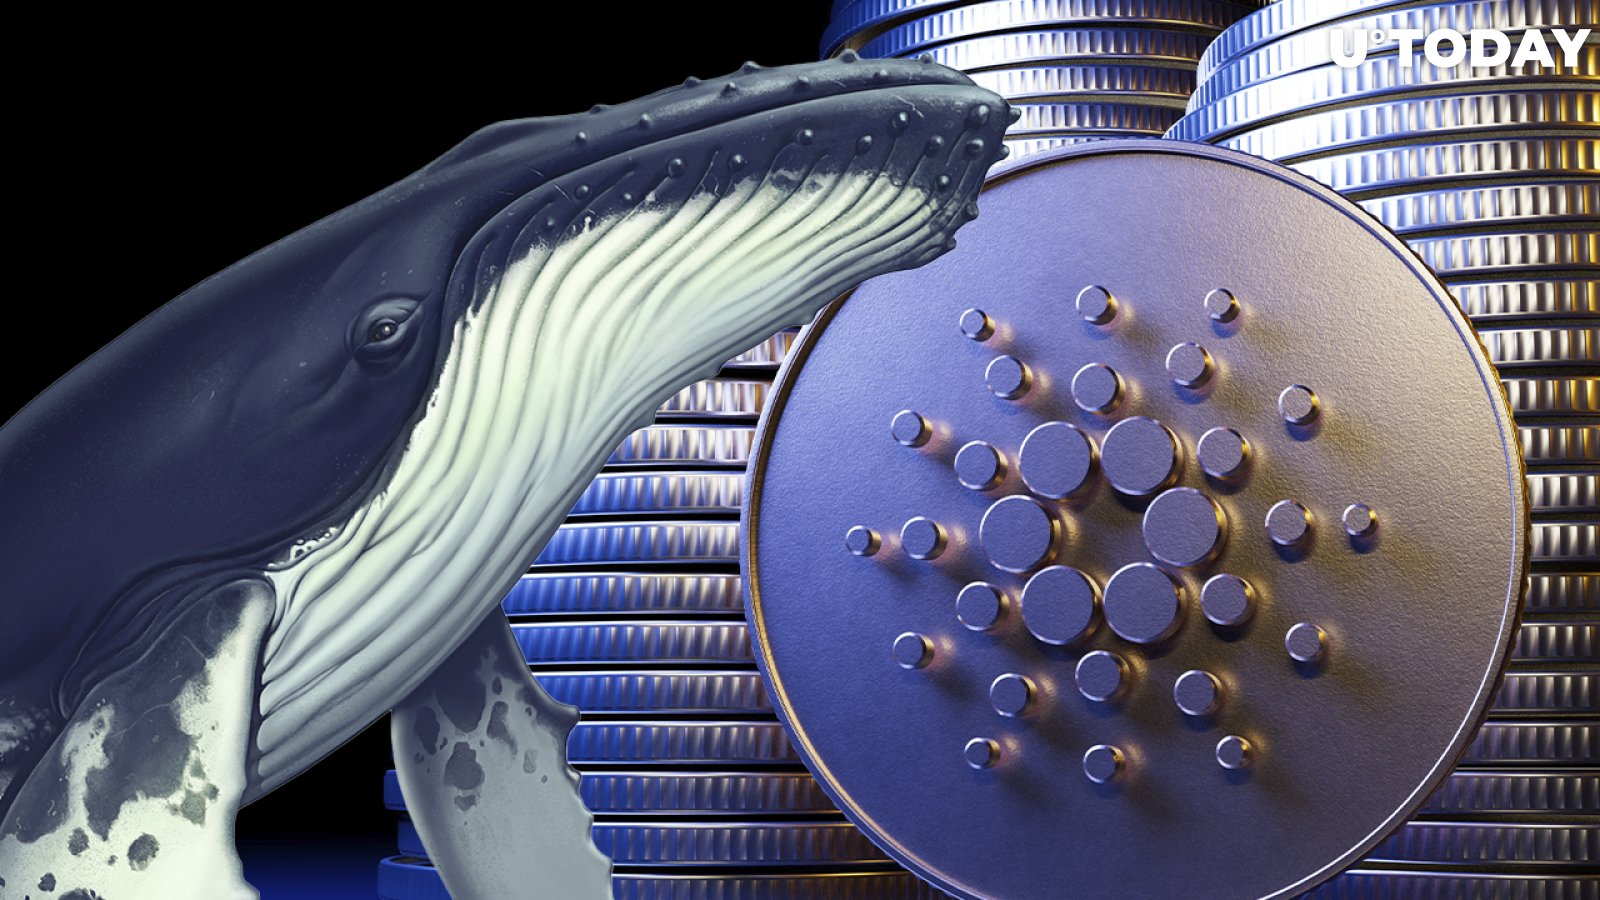 Cardano Sees Inflow of New Whales Since March – They Hold up to 12 Million ADA: Report